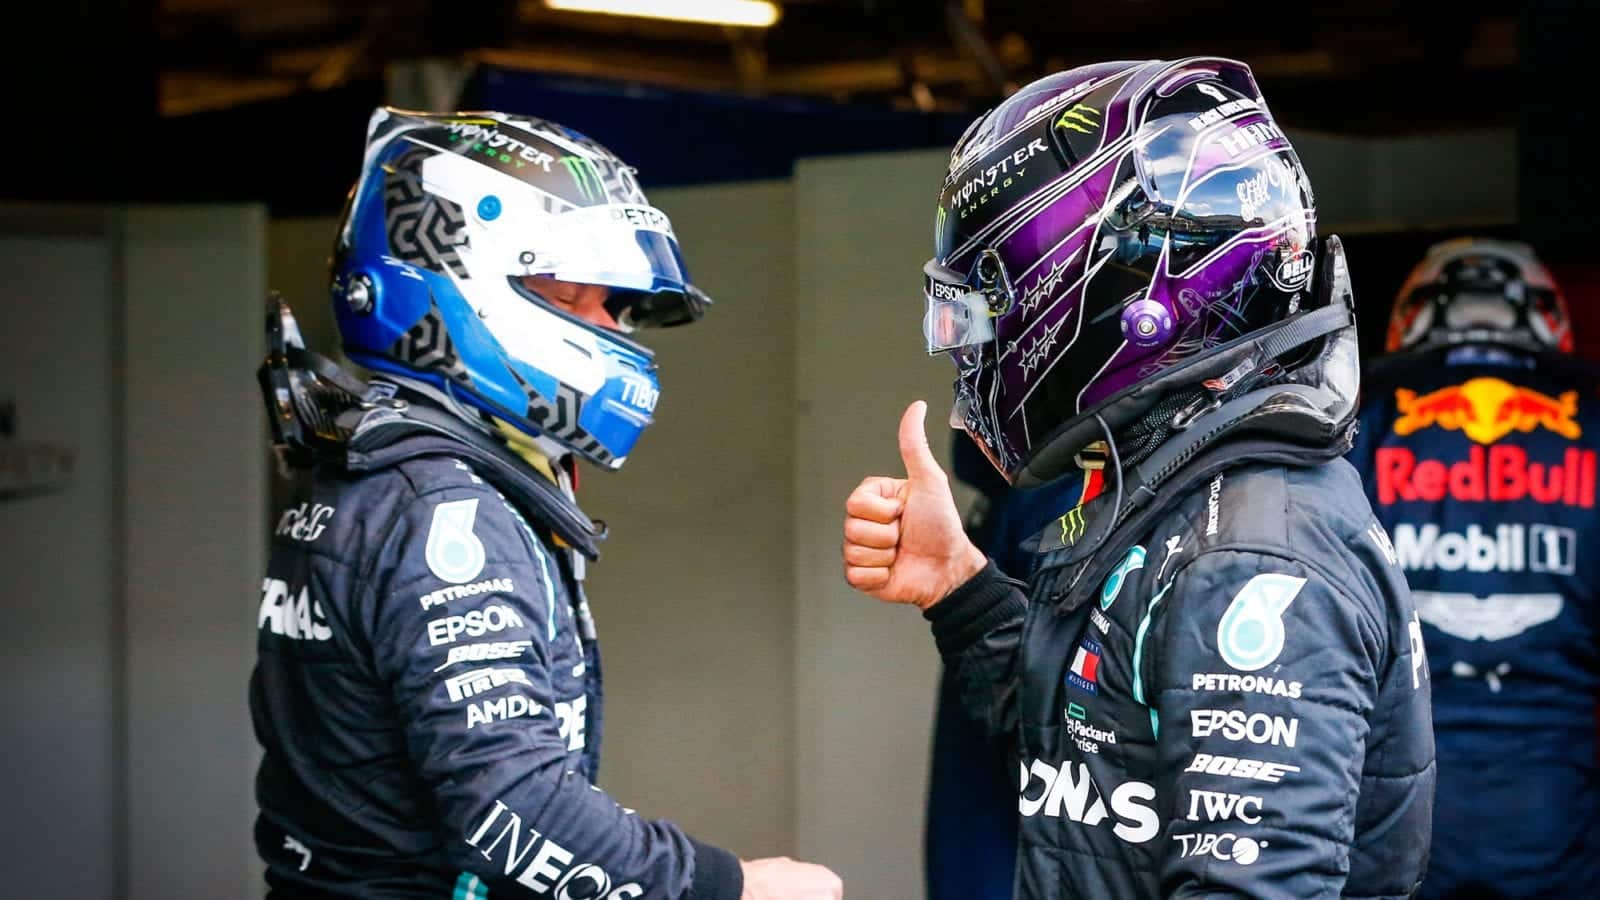 Lewis Hamilton gives the thumbs up to a defeated Vatteri Bottas after the 2020 F1 Eifel Grand Prix at the Nurburgring